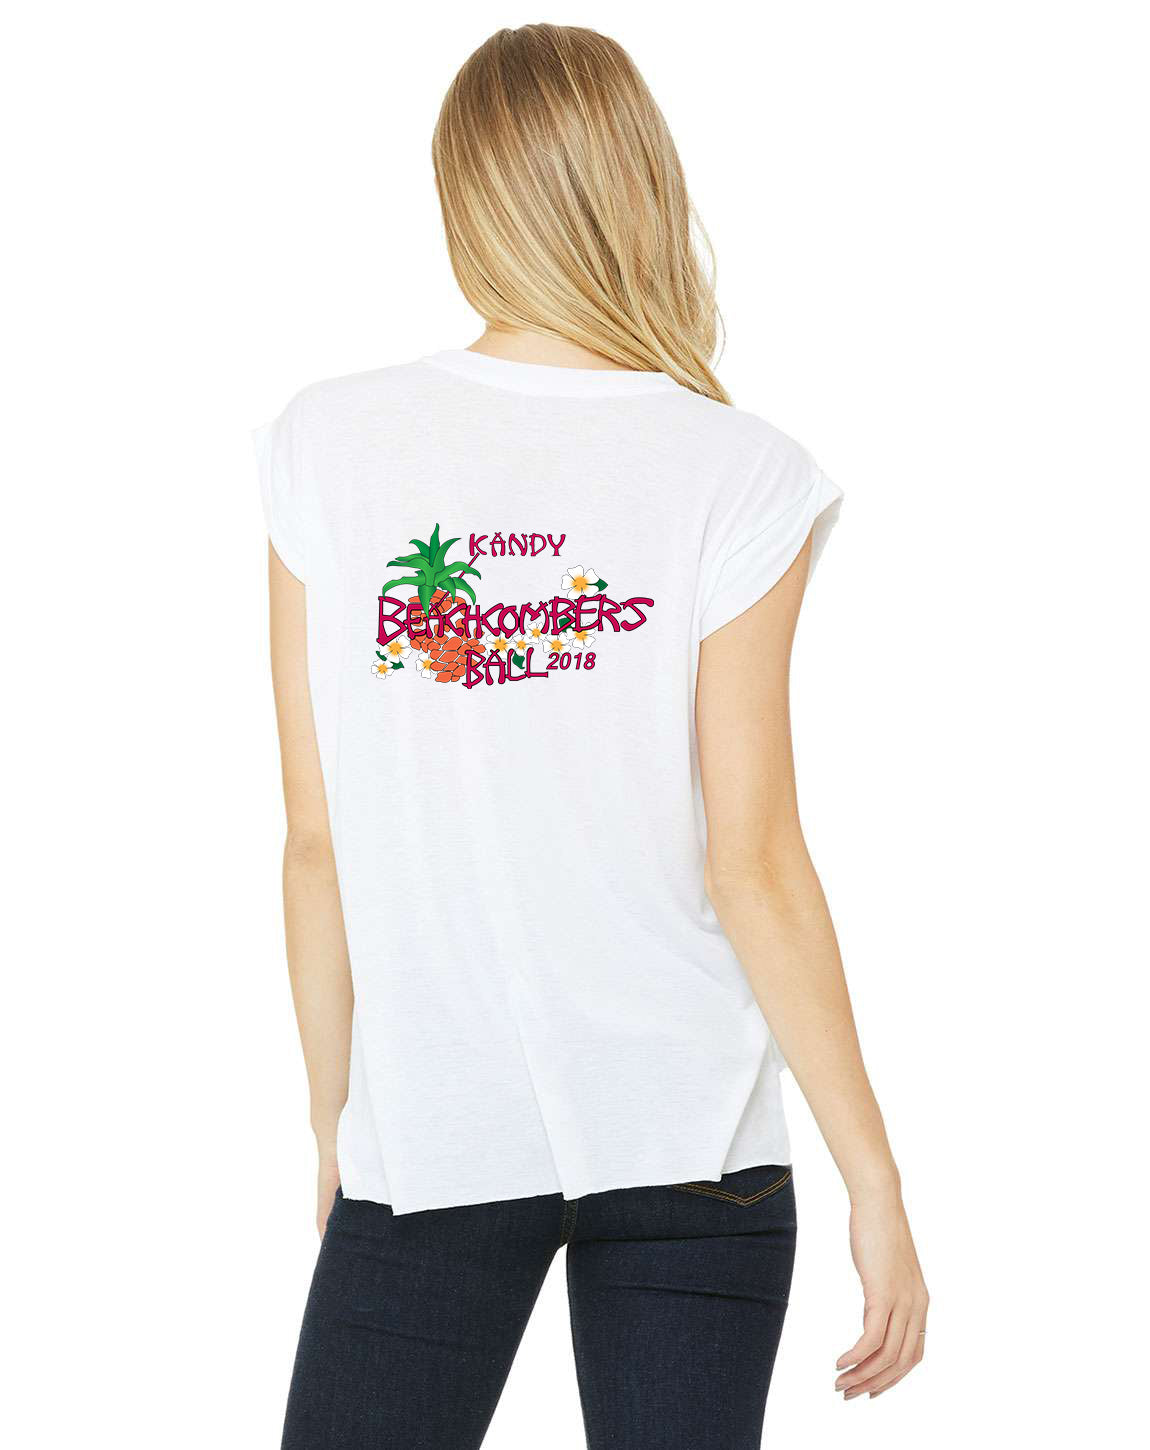 Beachcombers Woman's Back Muscle T White